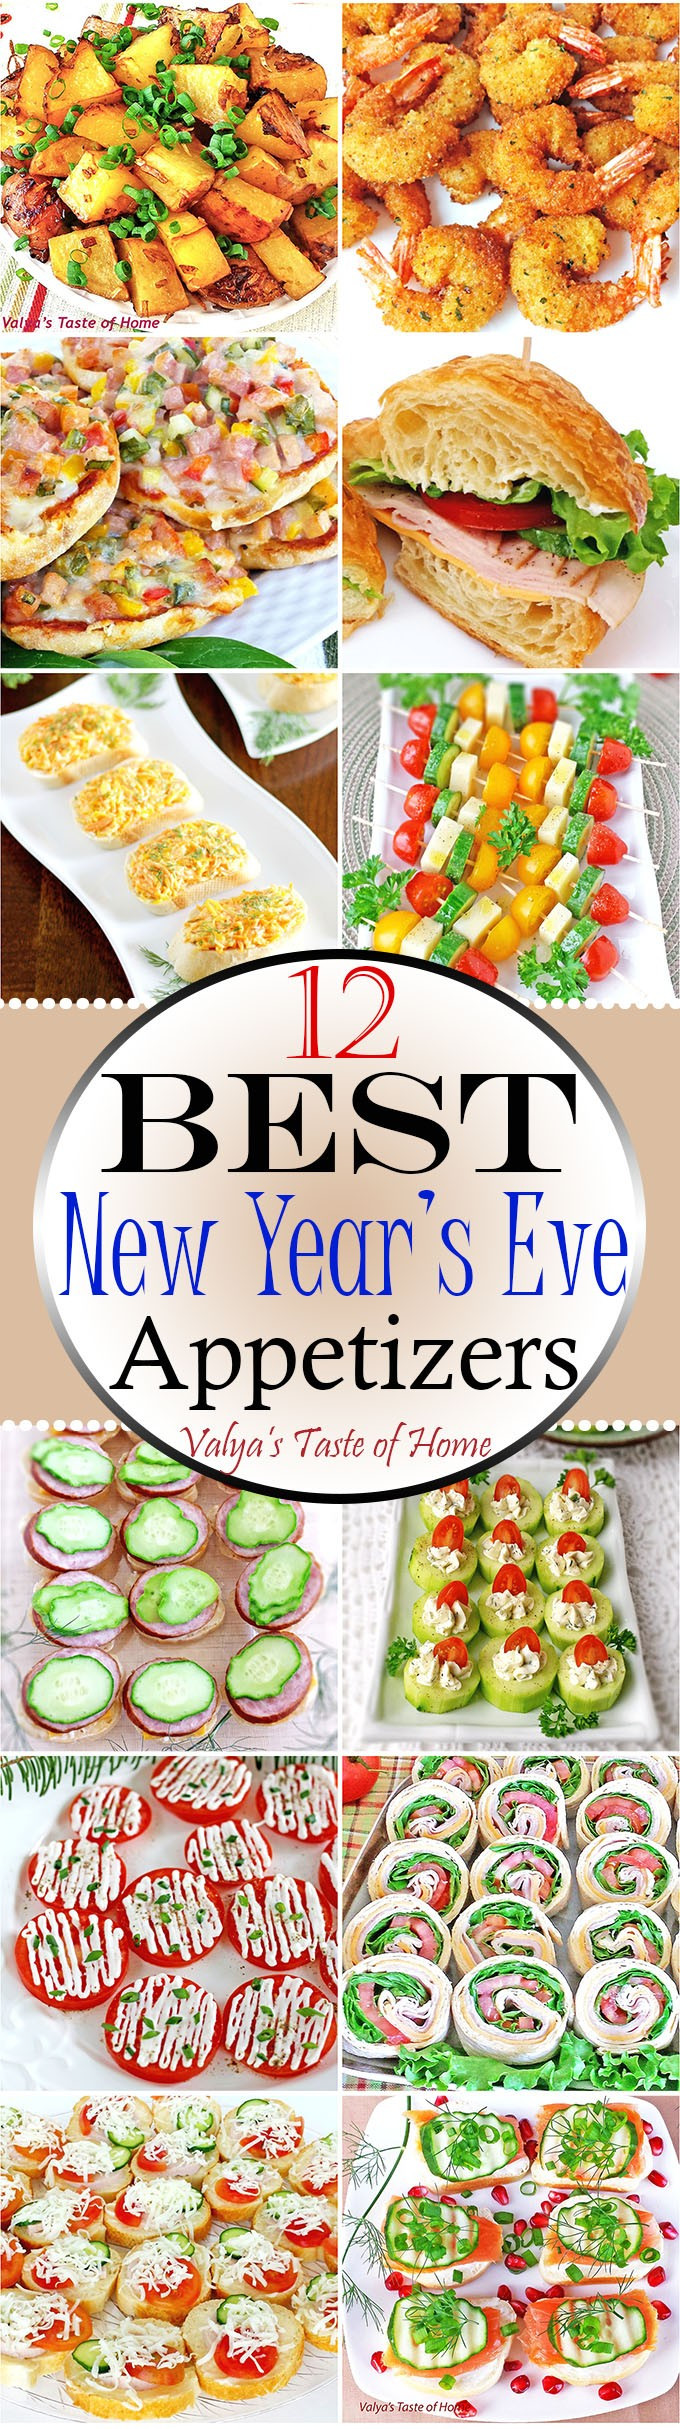 Best Appetizers For New Years Eve Parties
 12 Best New Year s Eve Appetizers Valya s Taste of Home